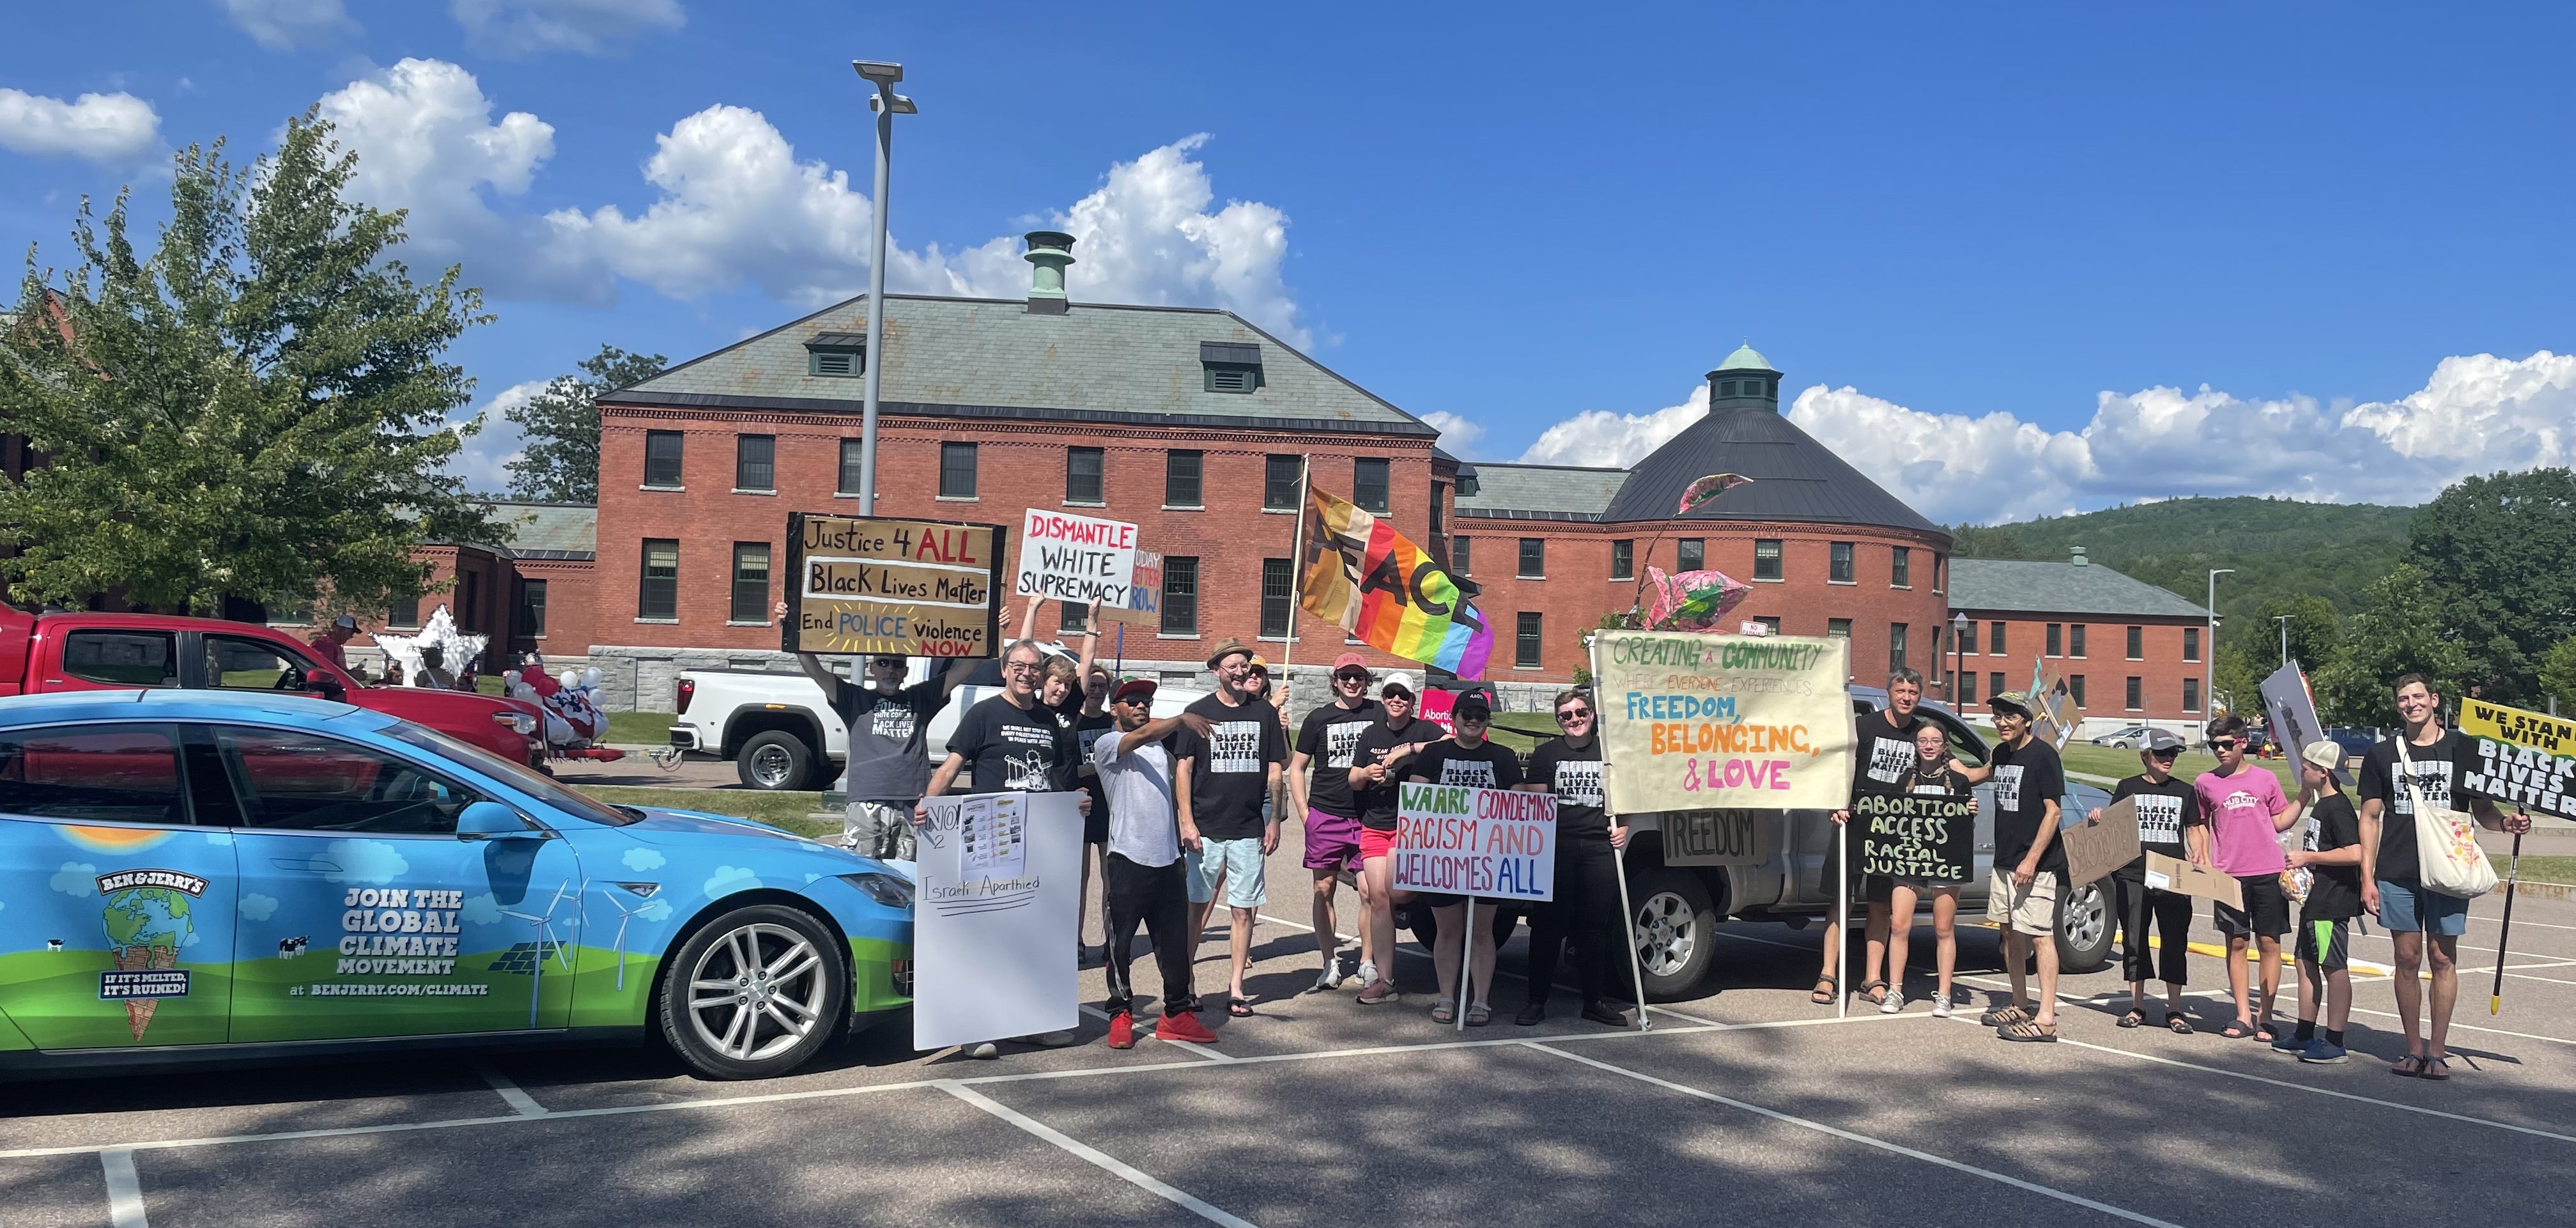 WAARC members lined up with signs, the Ben & Jerry's Tesla and their decorated truck for the NQID parade